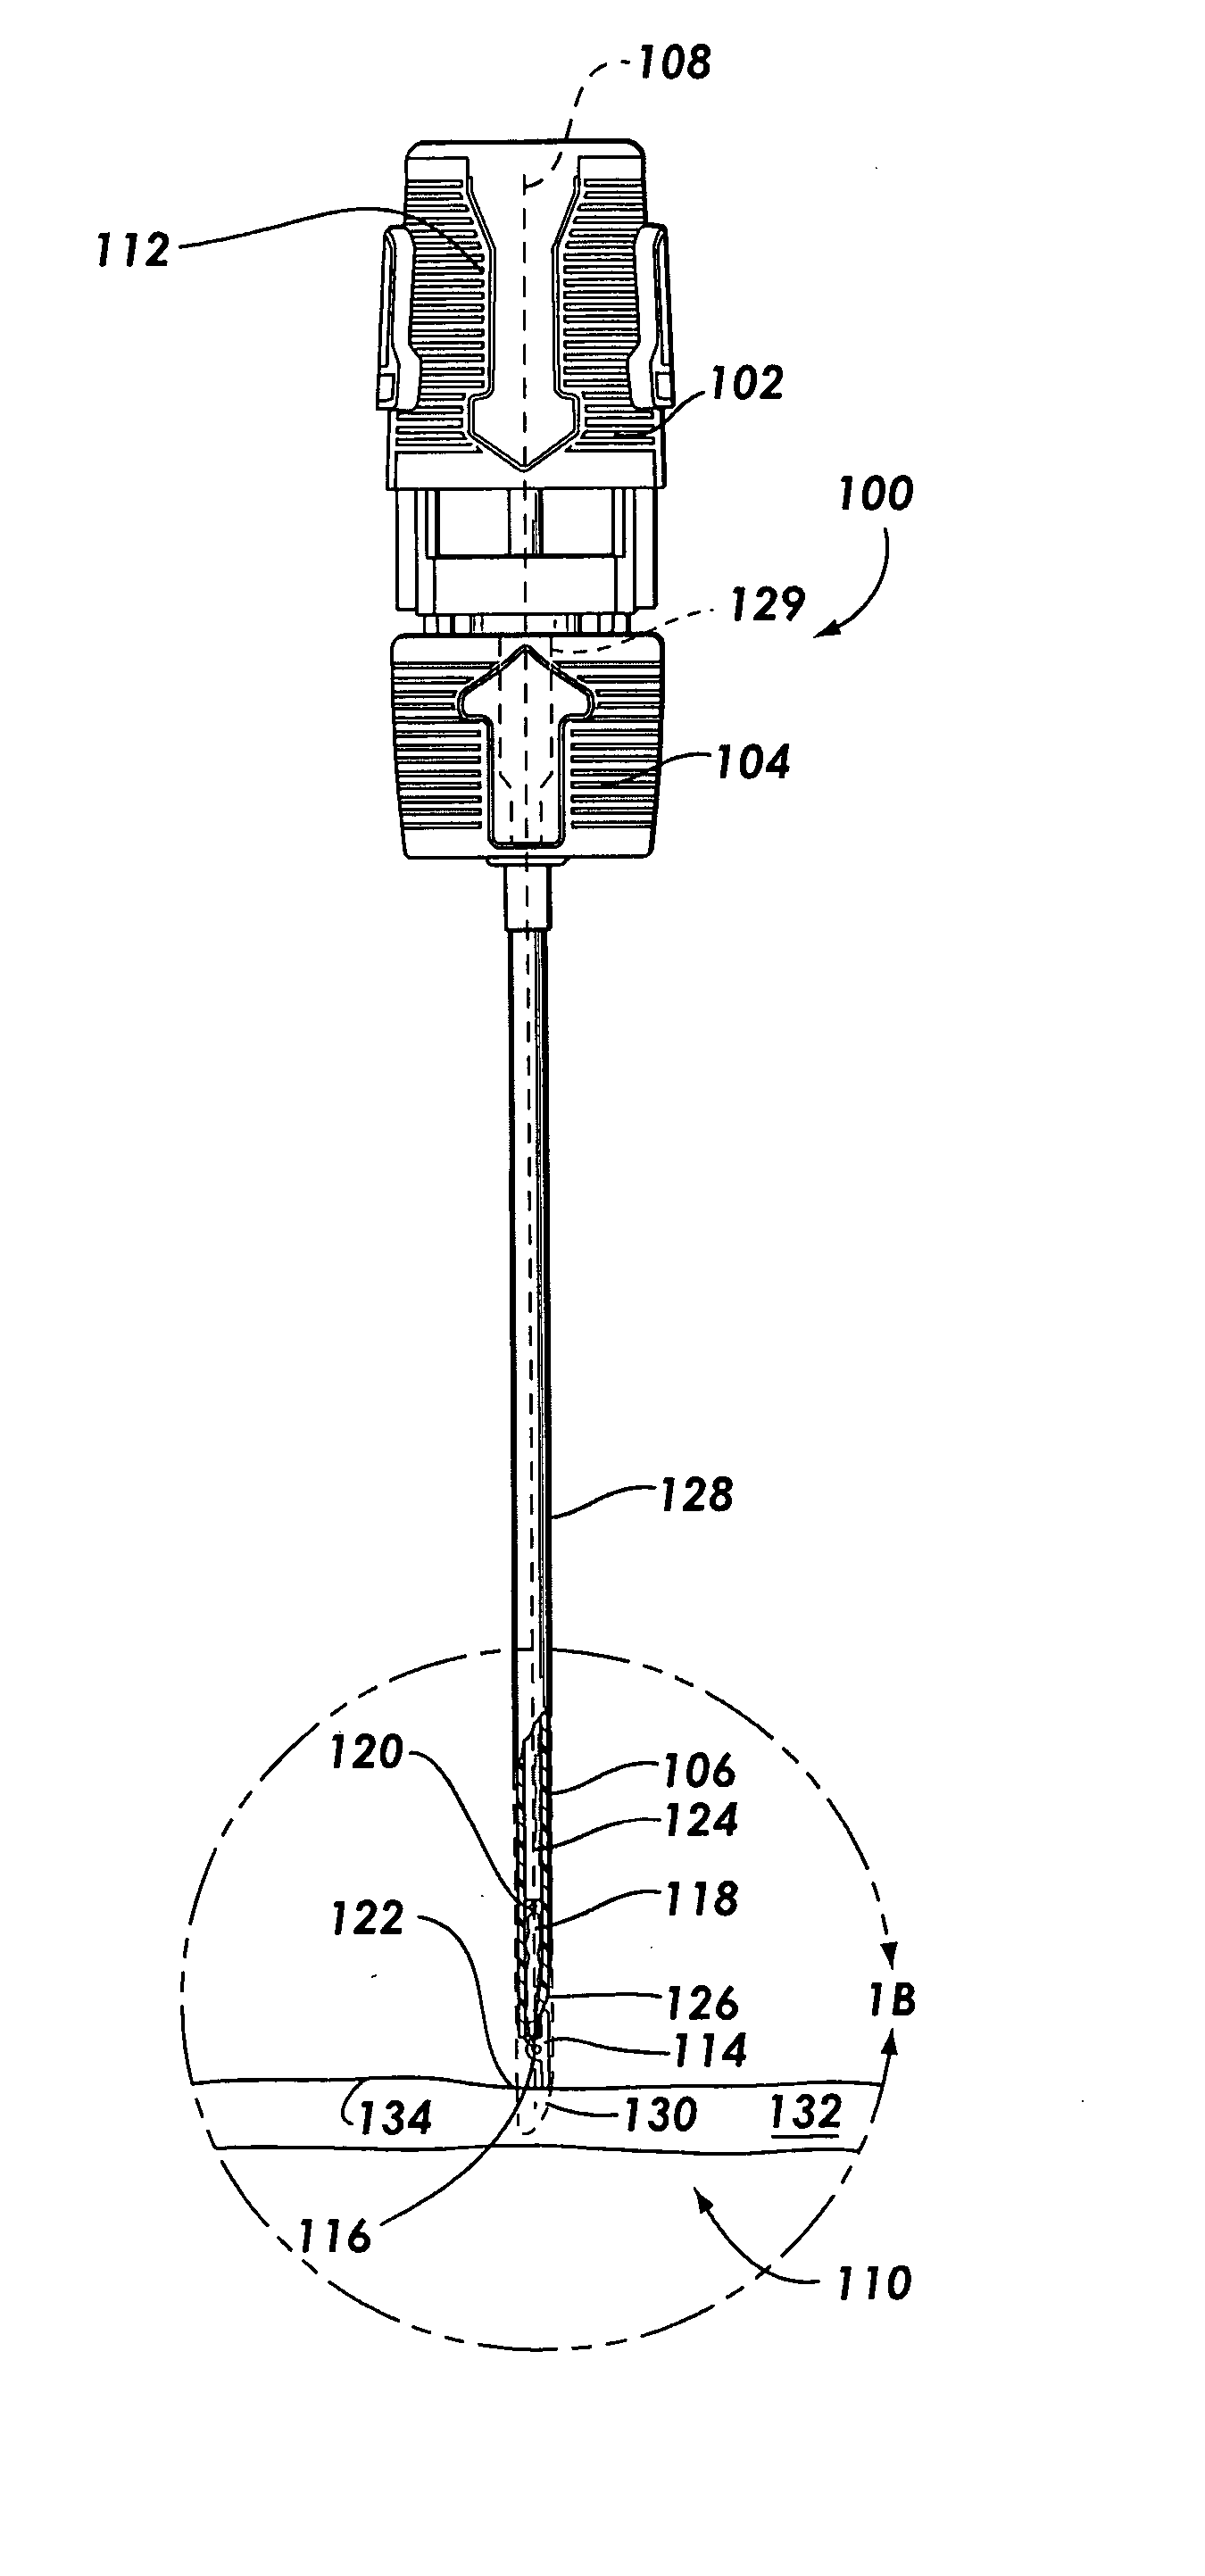 Vascular sealing device with high surface area sealing plug